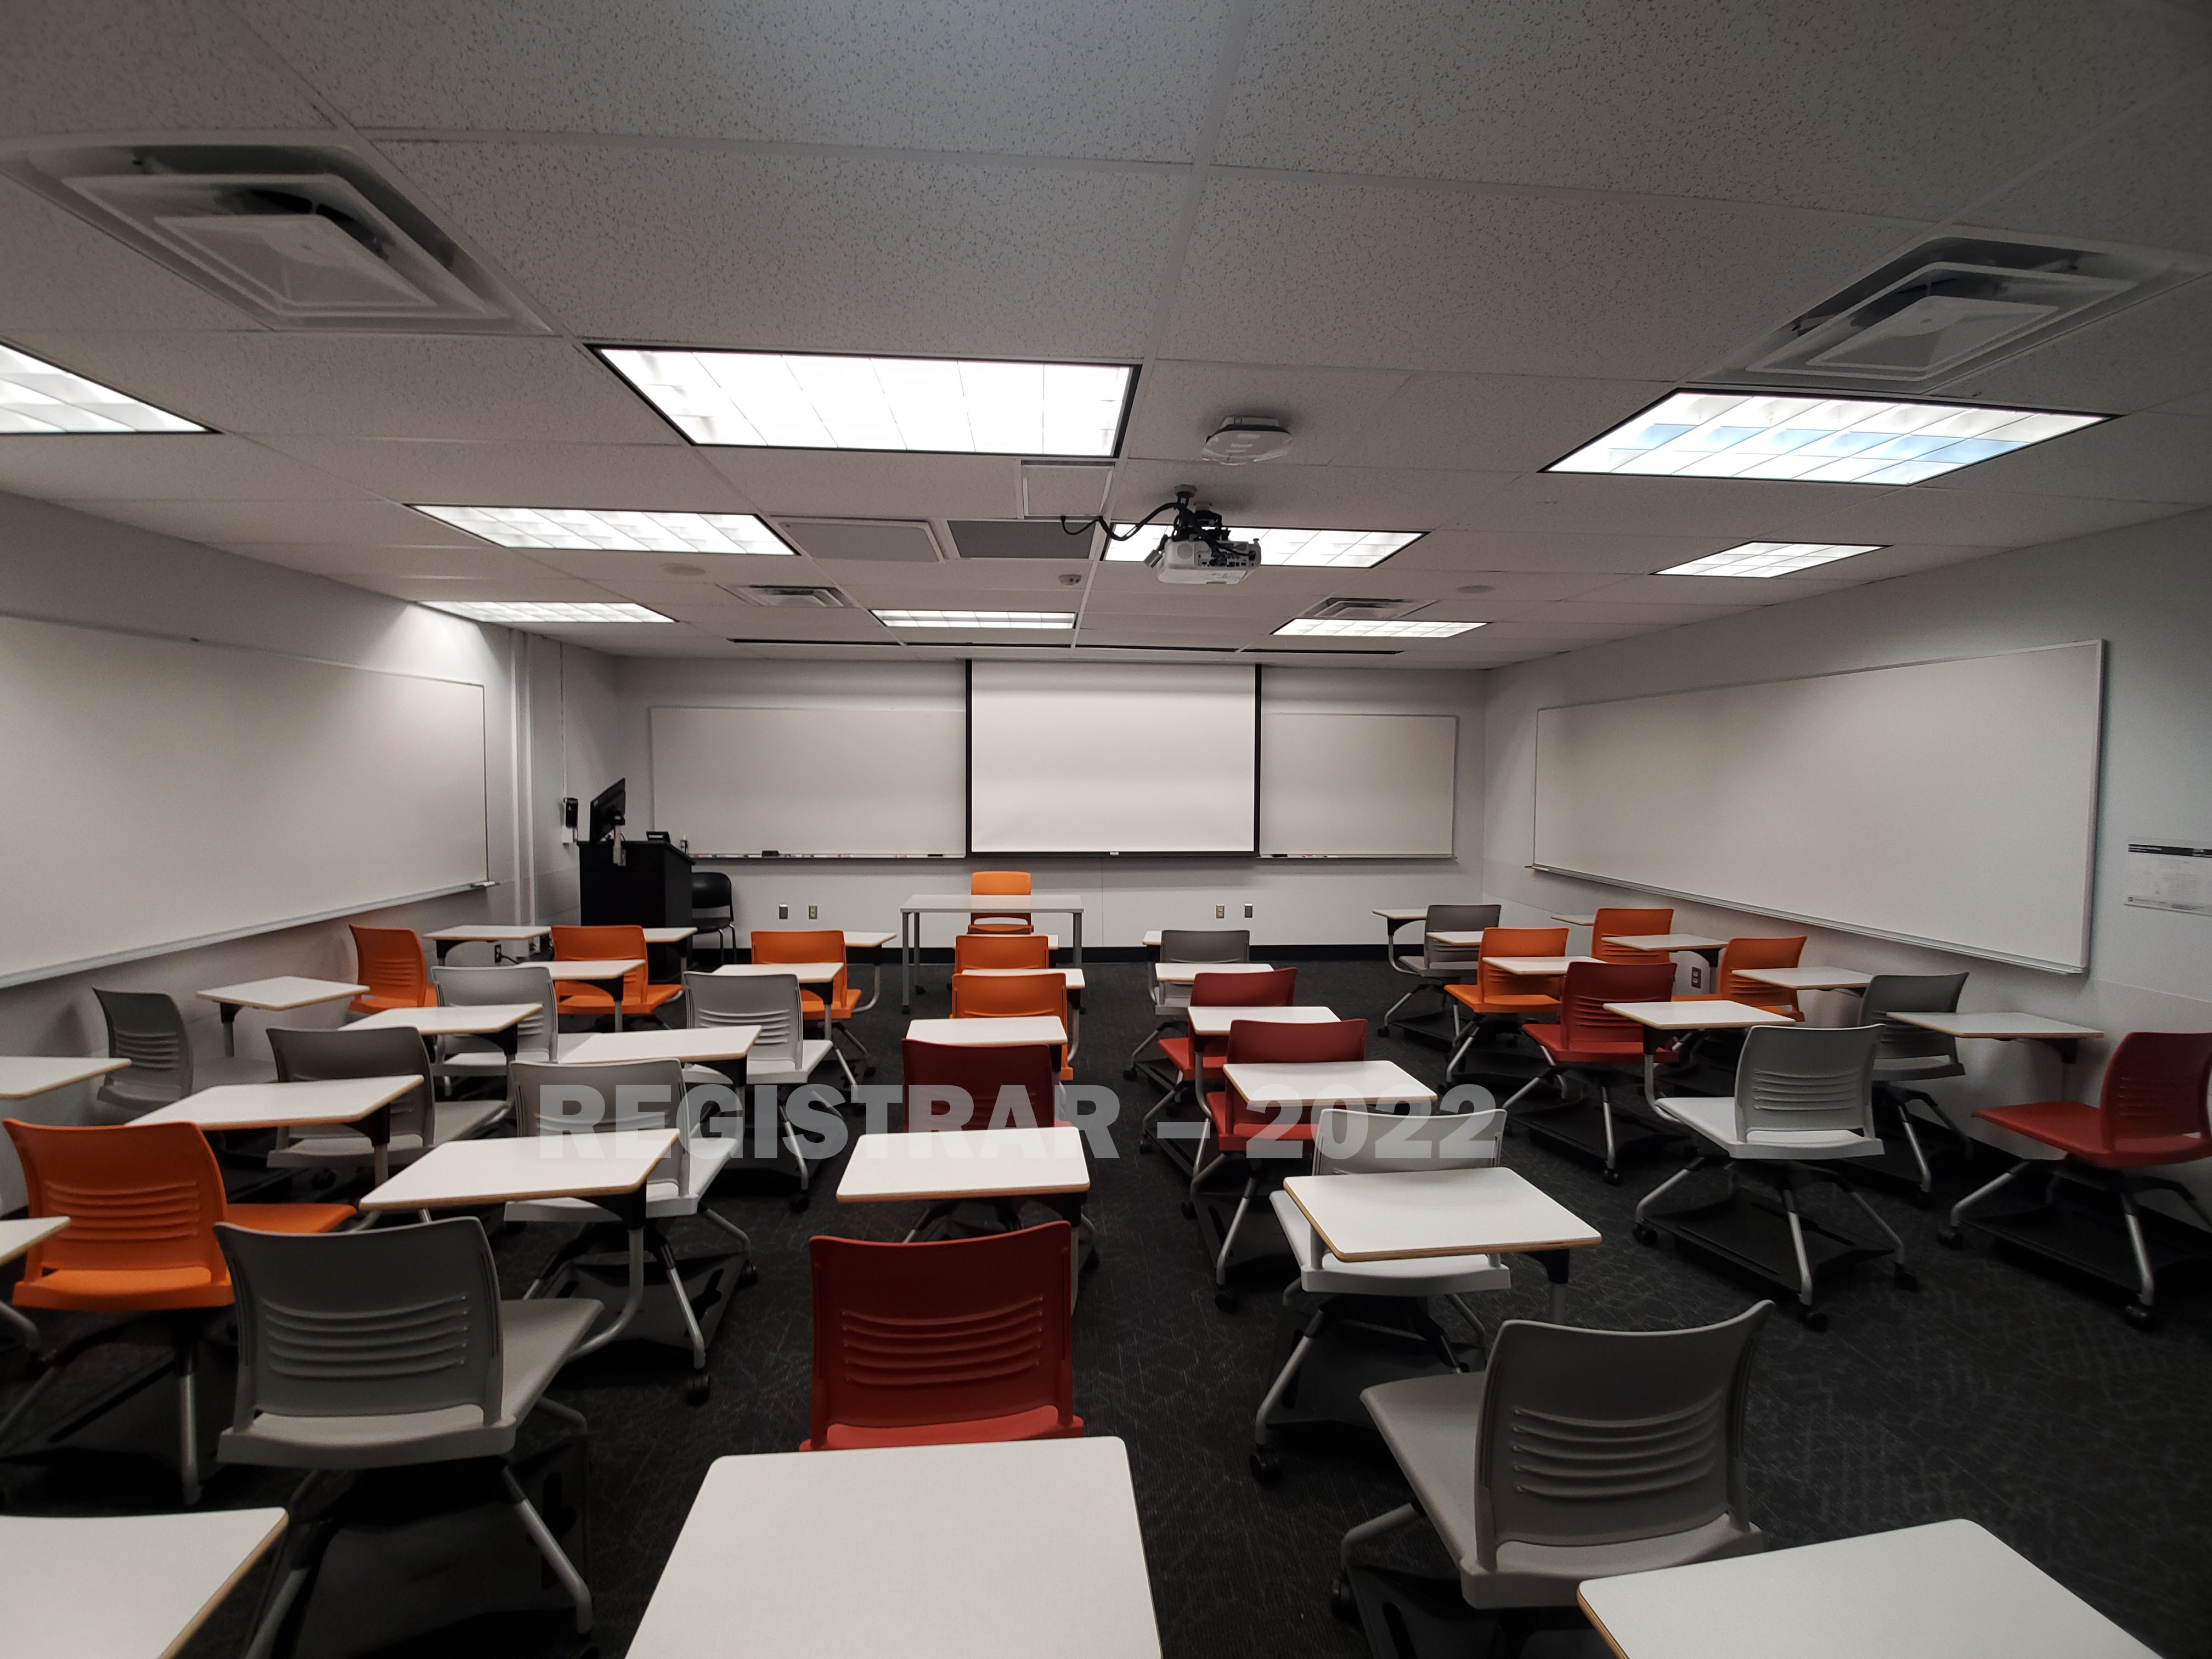 Journalism Building room 274 ultra wide angle view from the back of the room with projector screen down